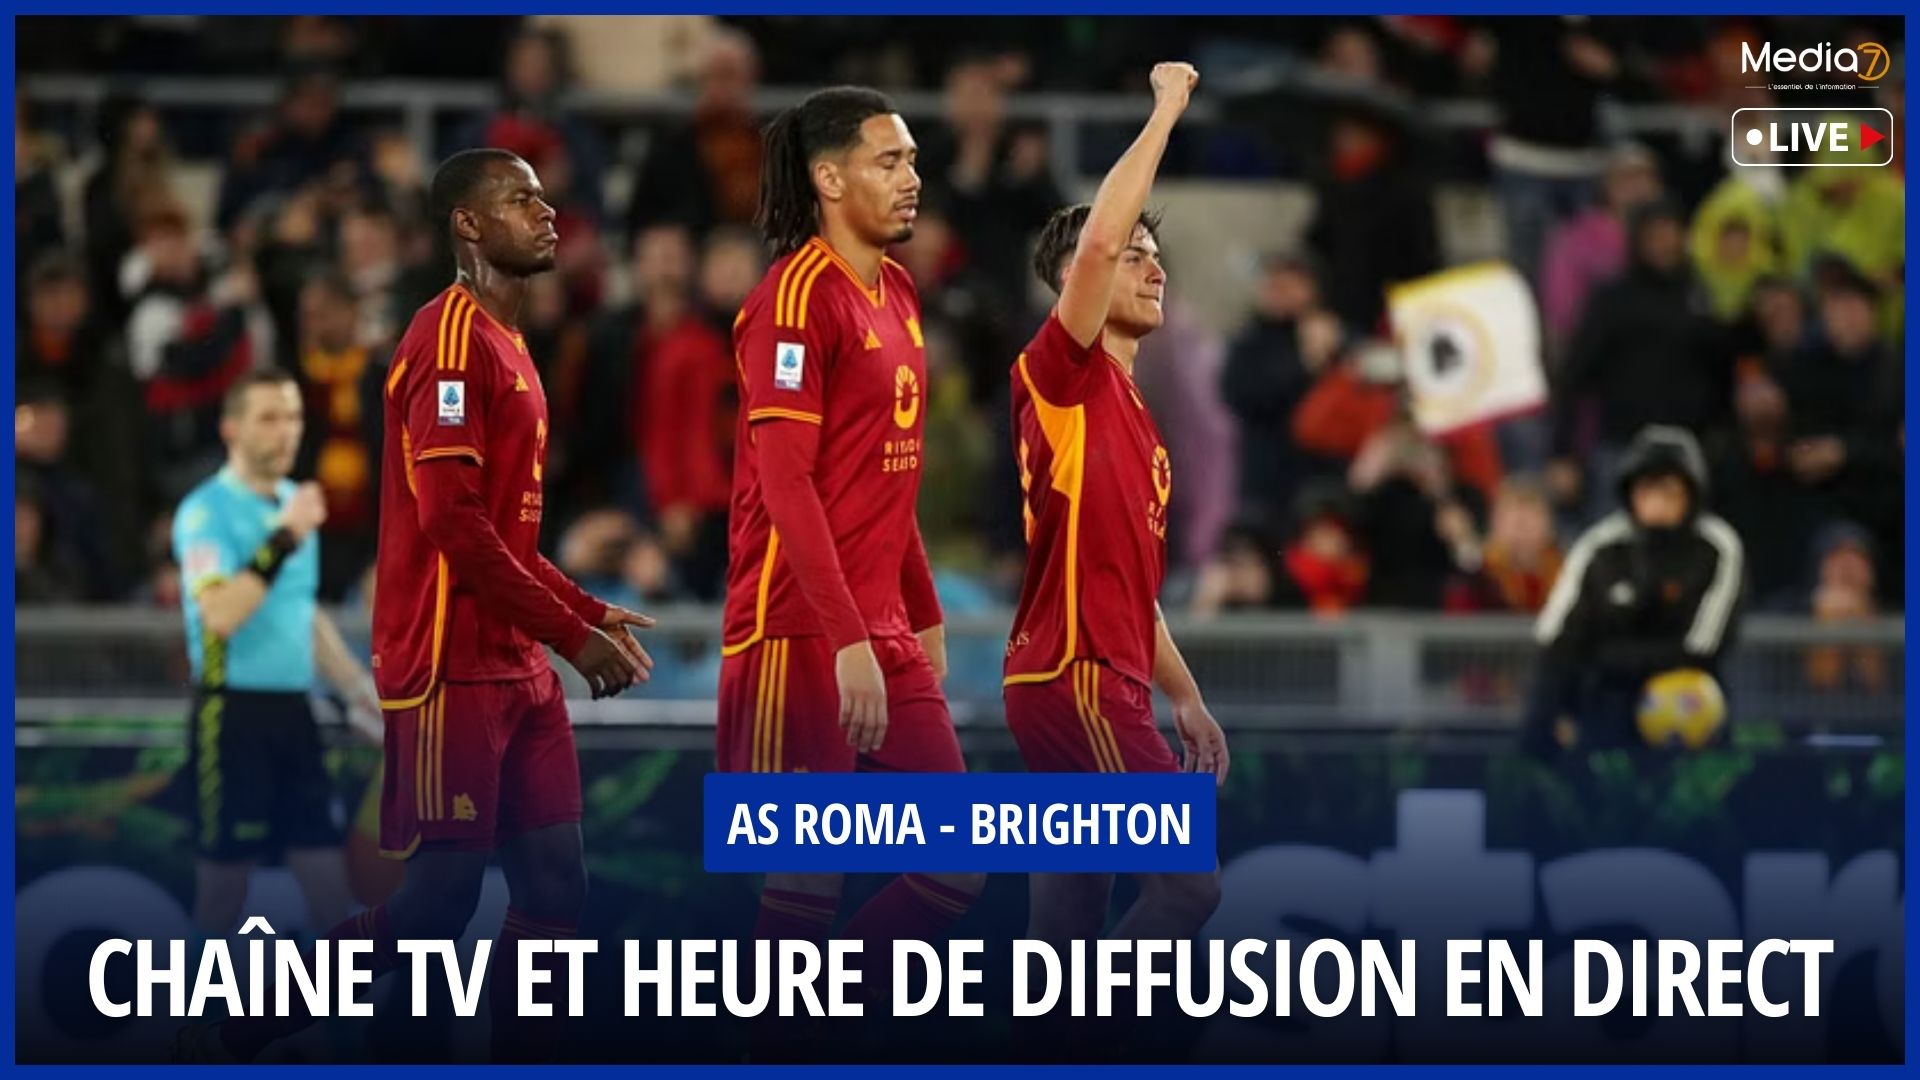 AS Roma - Brighton Match Live: TV Channel and Broadcast Time - Media7